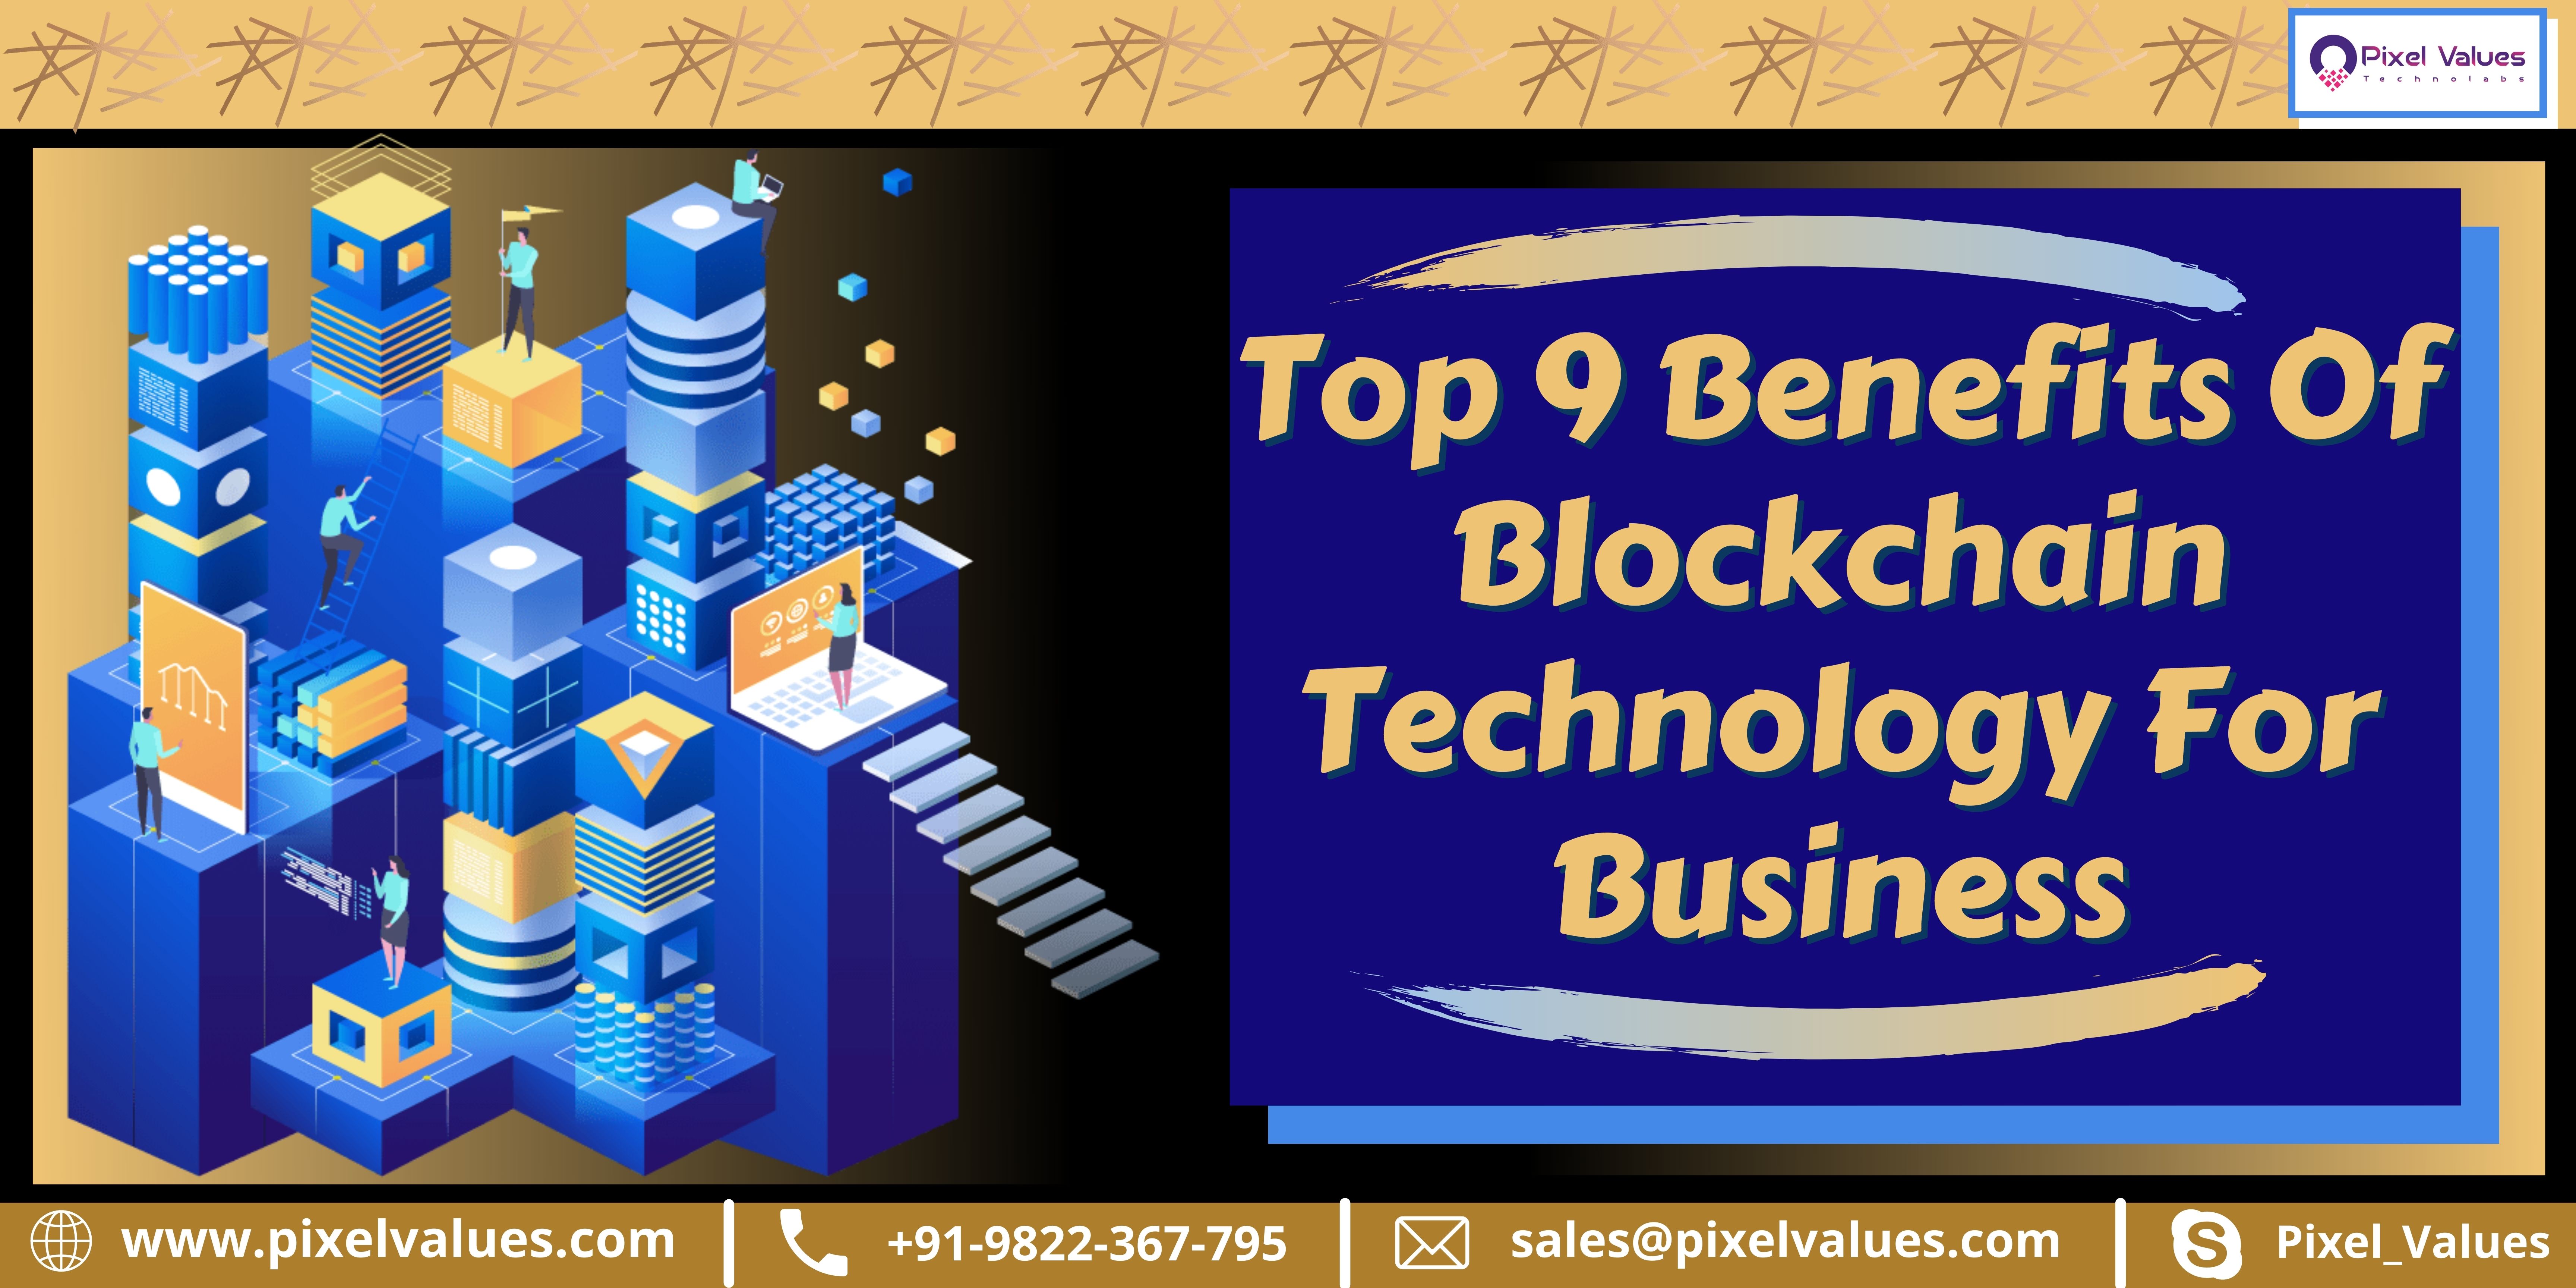 Top 9 Benefits Of
Blockchain

Technology For
LCL

_ uu